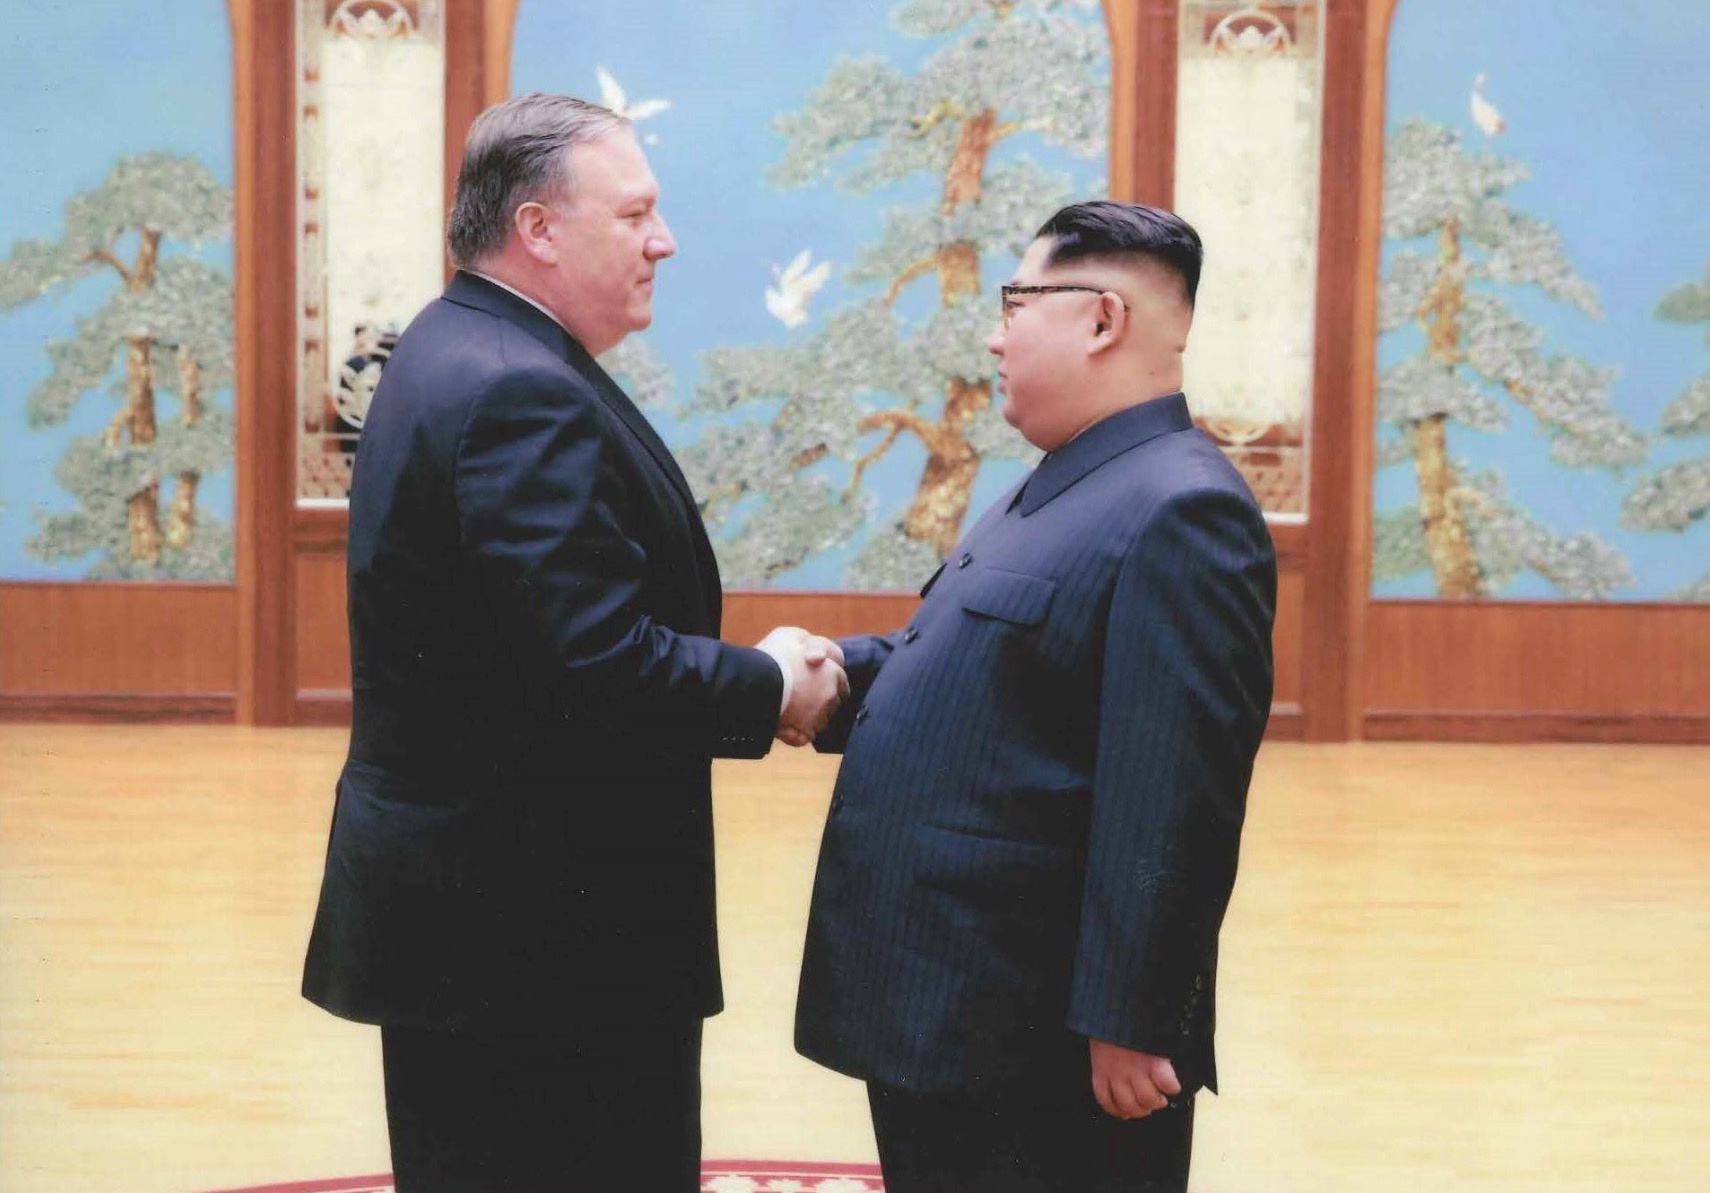 U.S. government handout photo shows CIA Director Mike Pompeo meeting with North Korean leader Kim Jong Un in Pyongyang